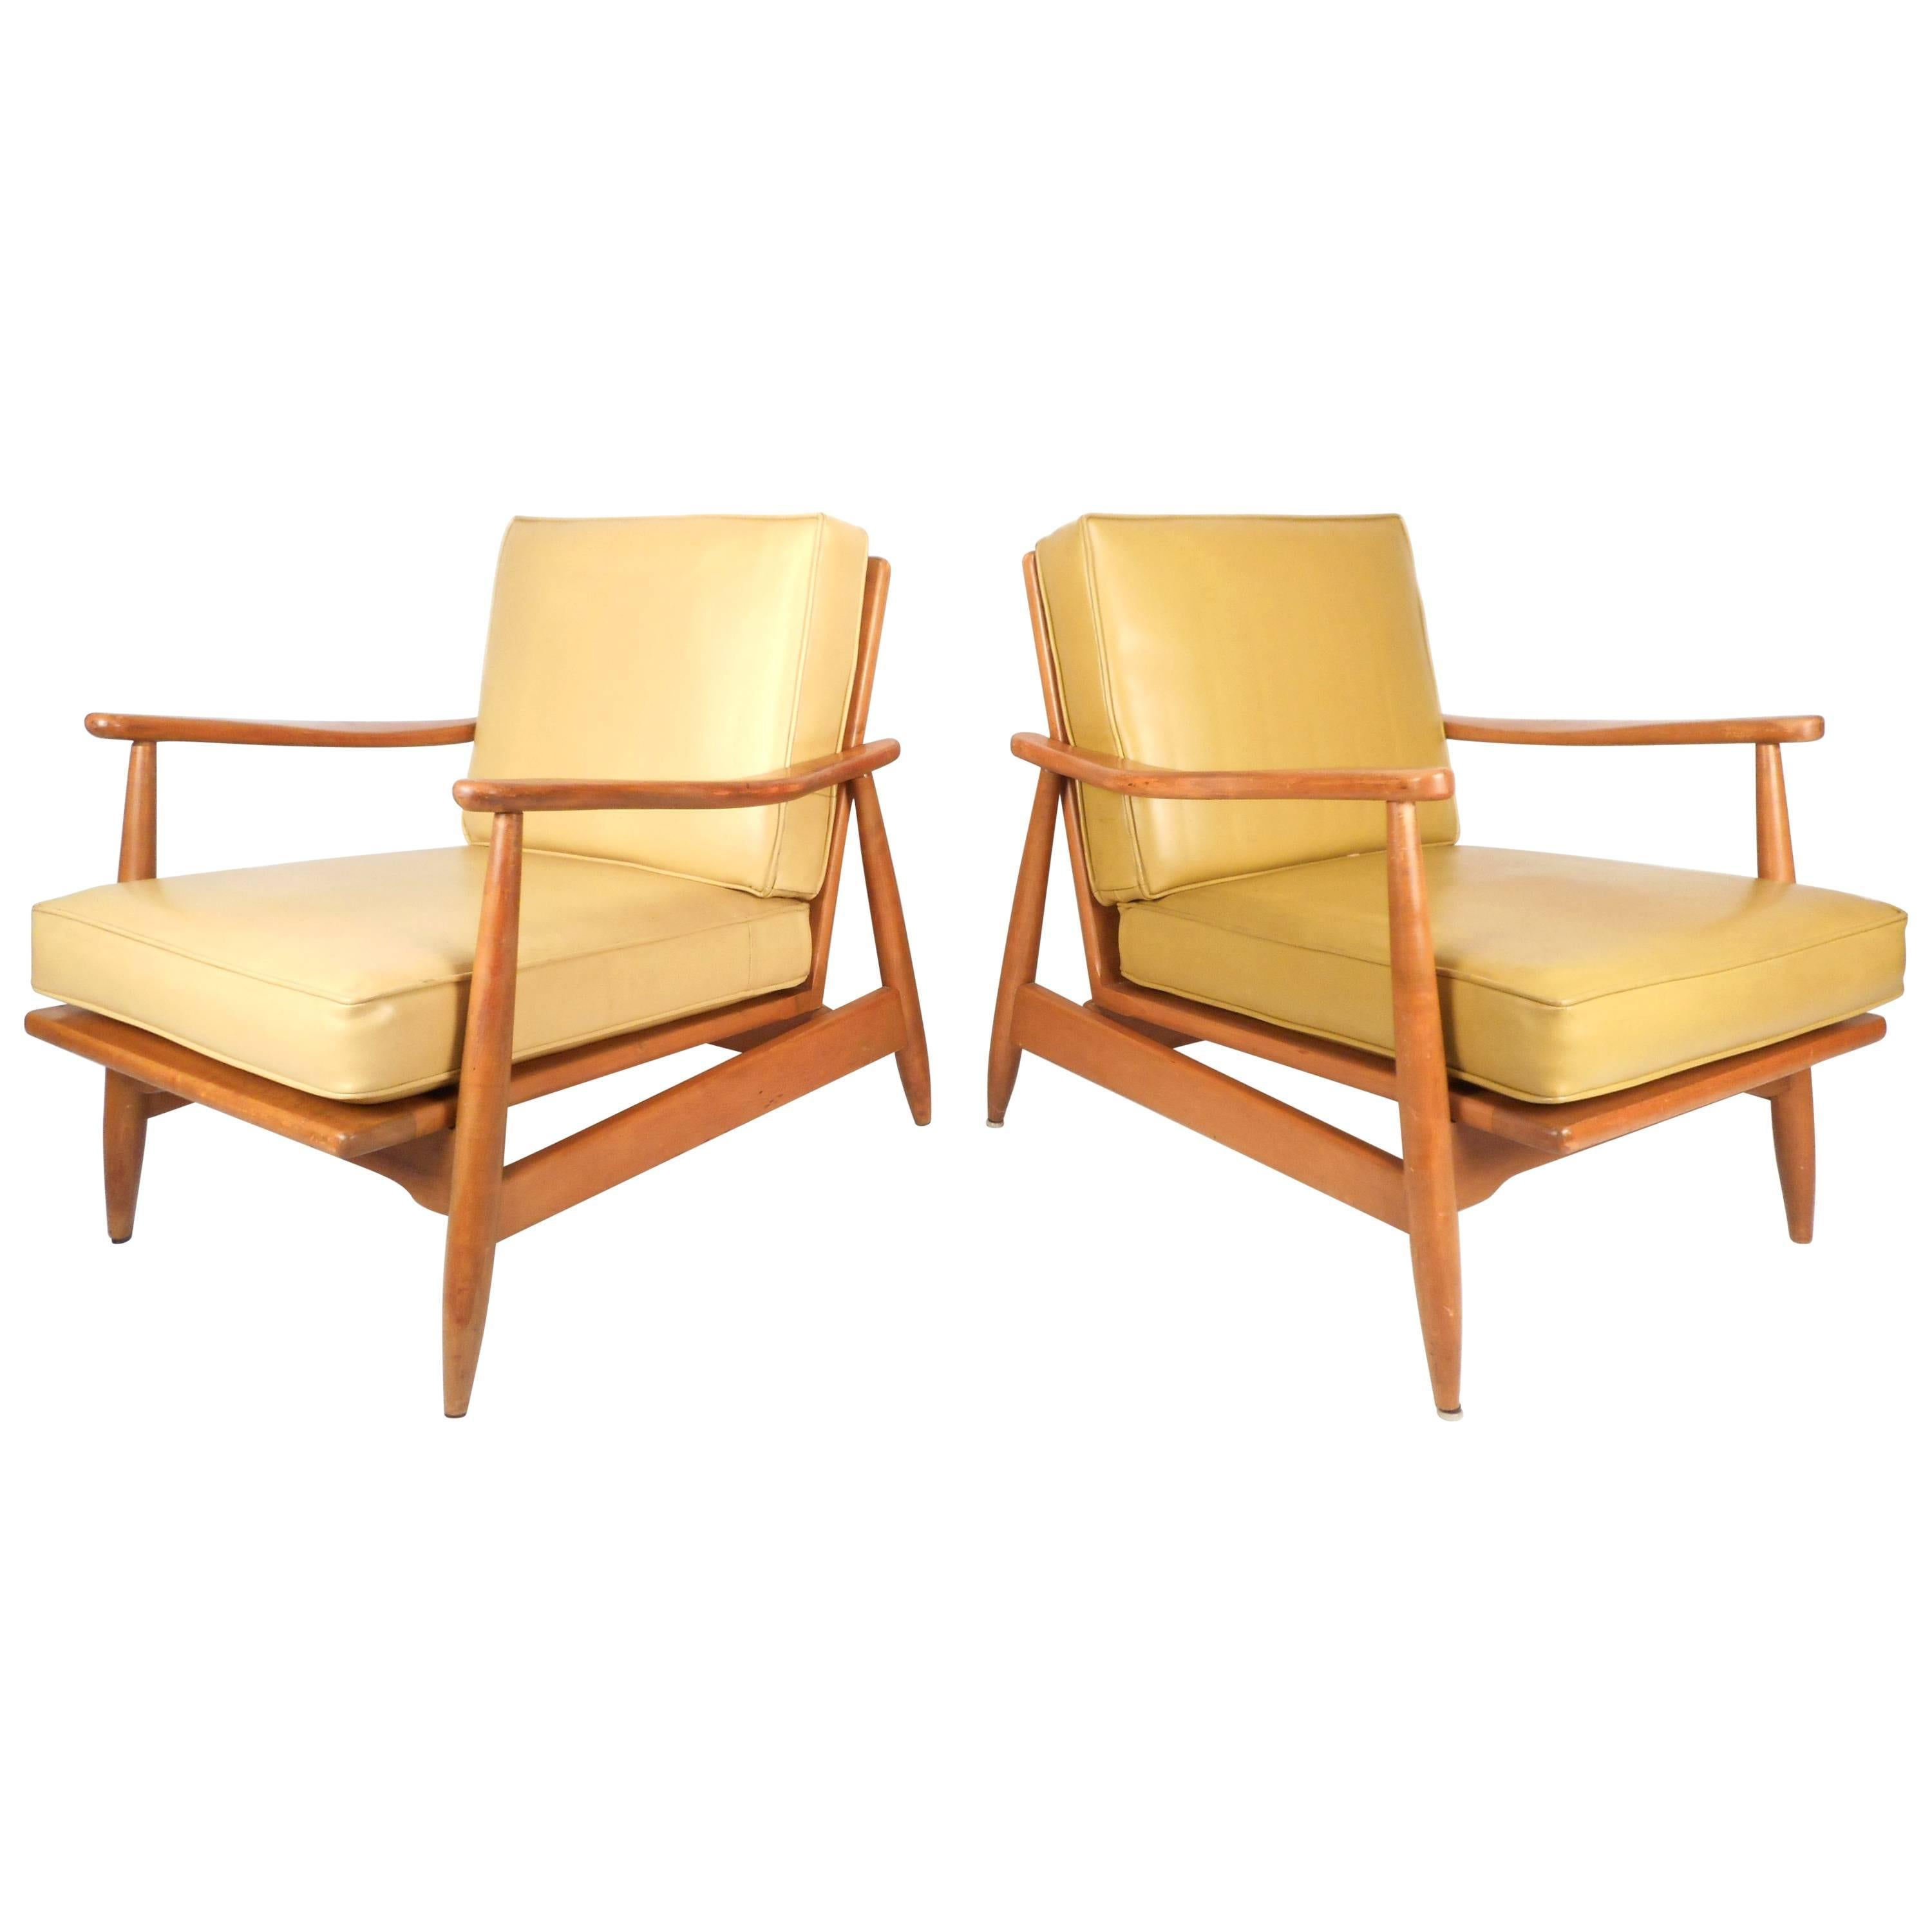 Pair of Mid-Century Modern Maple and Vinyl Lounge Chairs